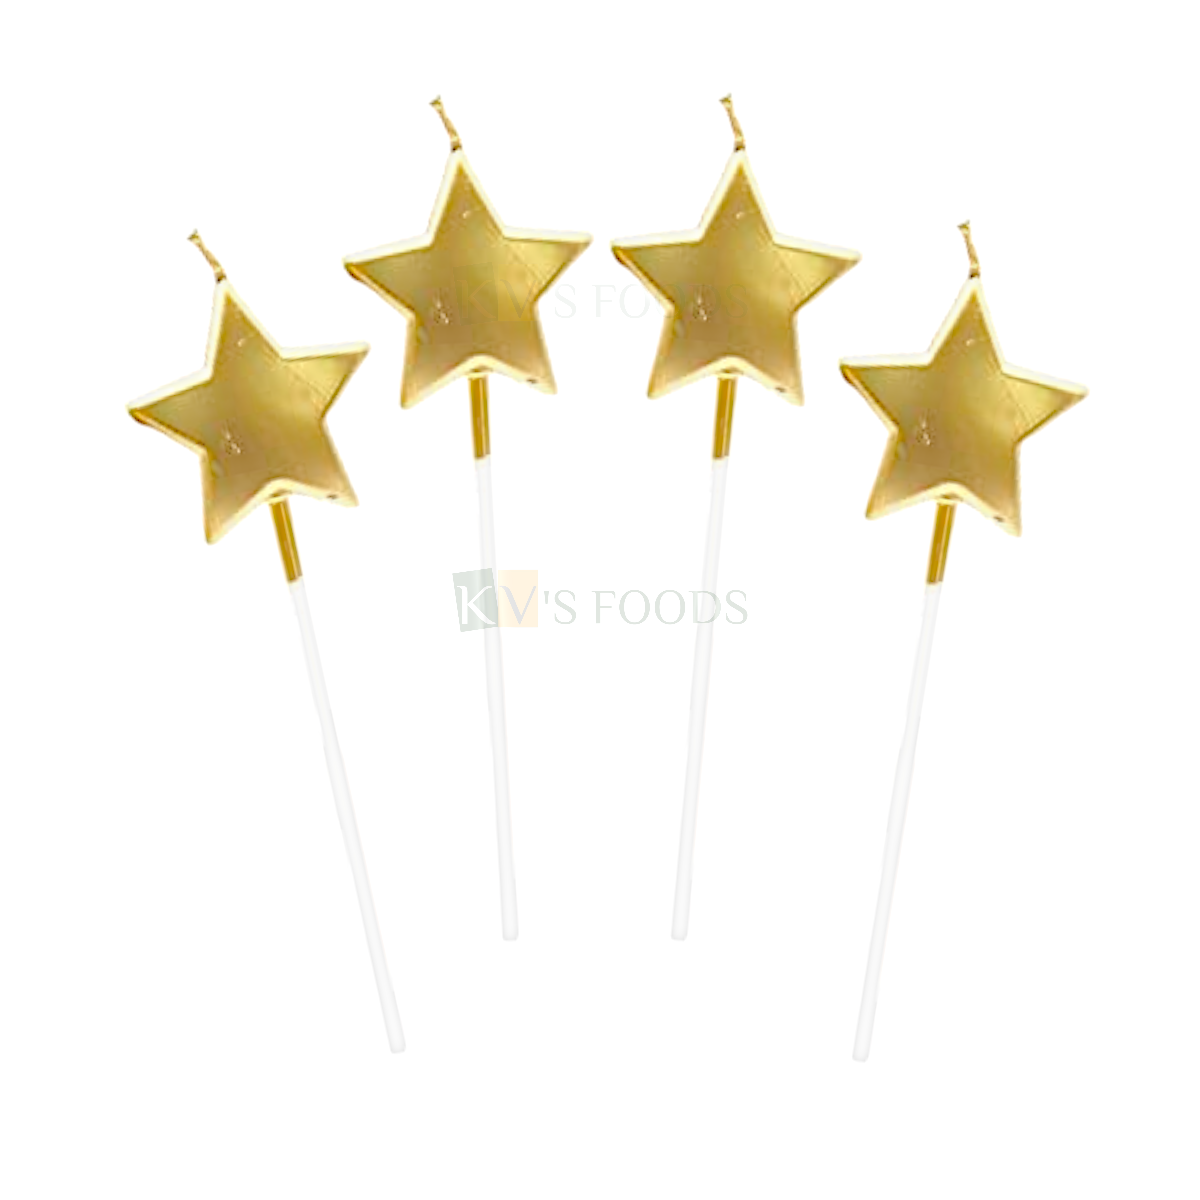 4 PCS Shiny Golden Colour Star Shape Wax Candles Cake and Cupcake Inserts Wedding New Years Cakes Decorations Happy Birthday Party Theme Metallic Cake Candles DIY Cake Decorations